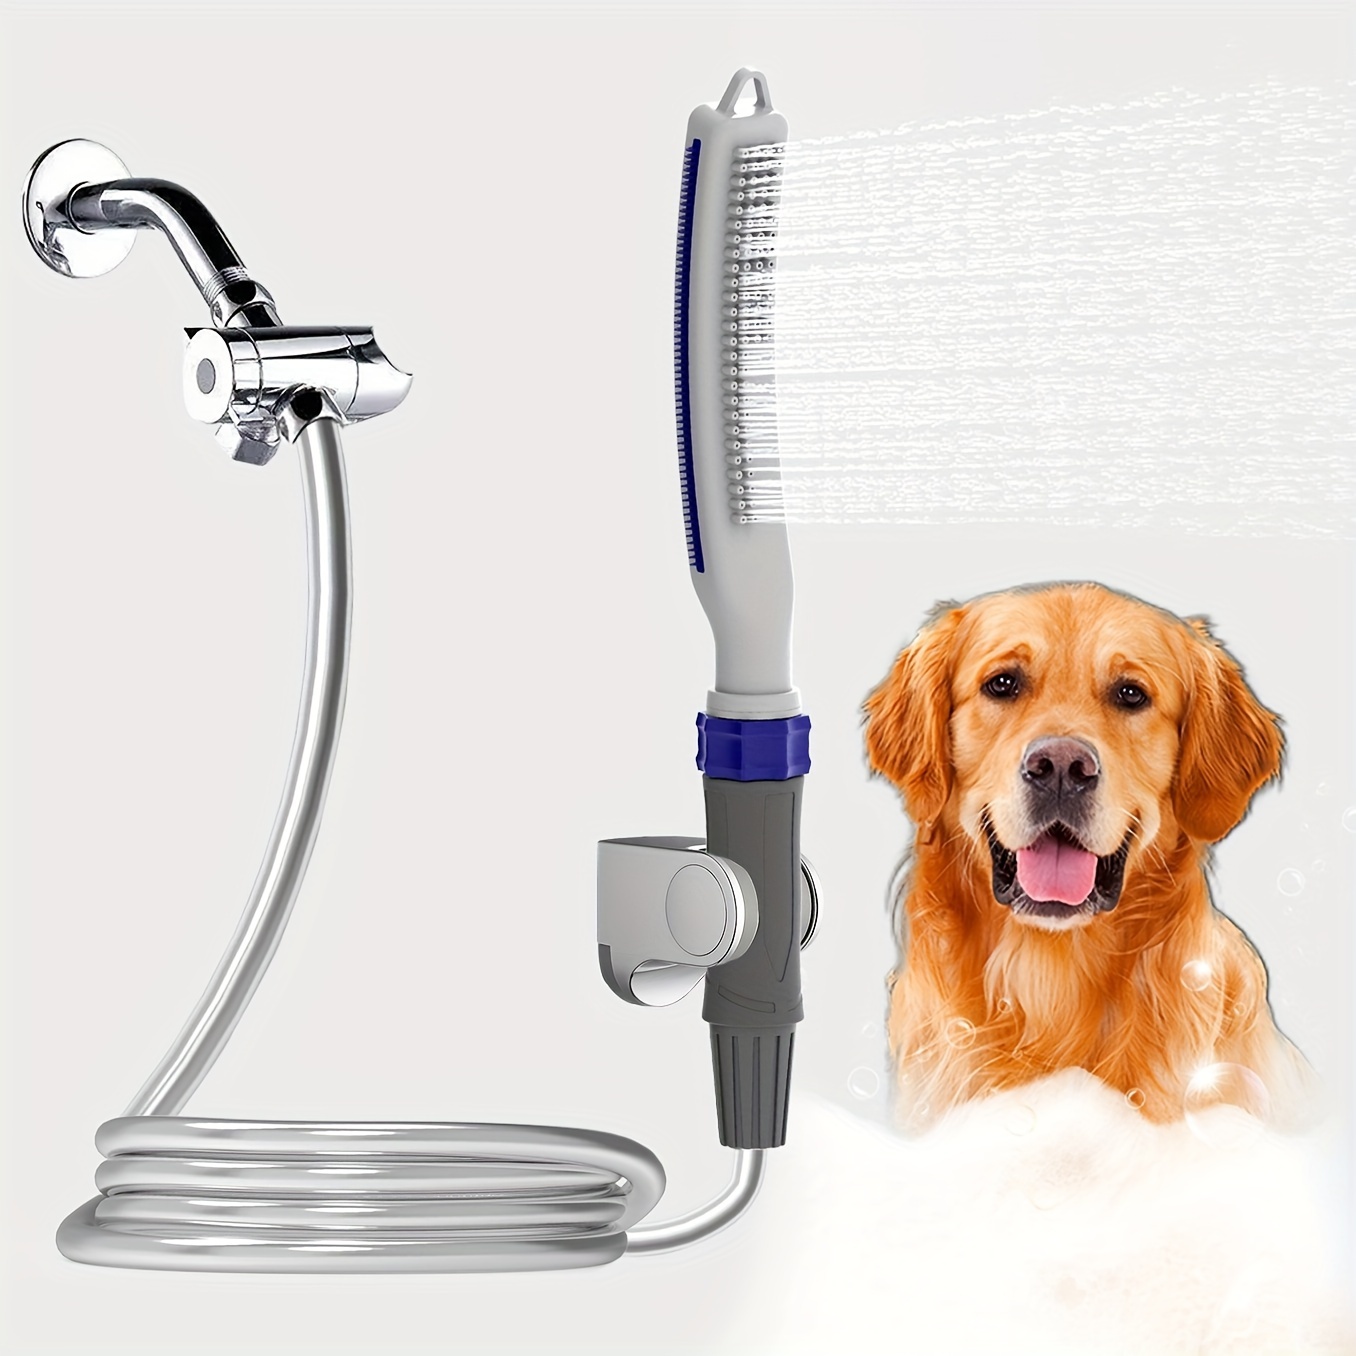 

Pet Shower Attachment For Bathing And Cleaning, Indoor And Outdoor Includes 8-foot Flex Hose, Adapter, Quick Connector.